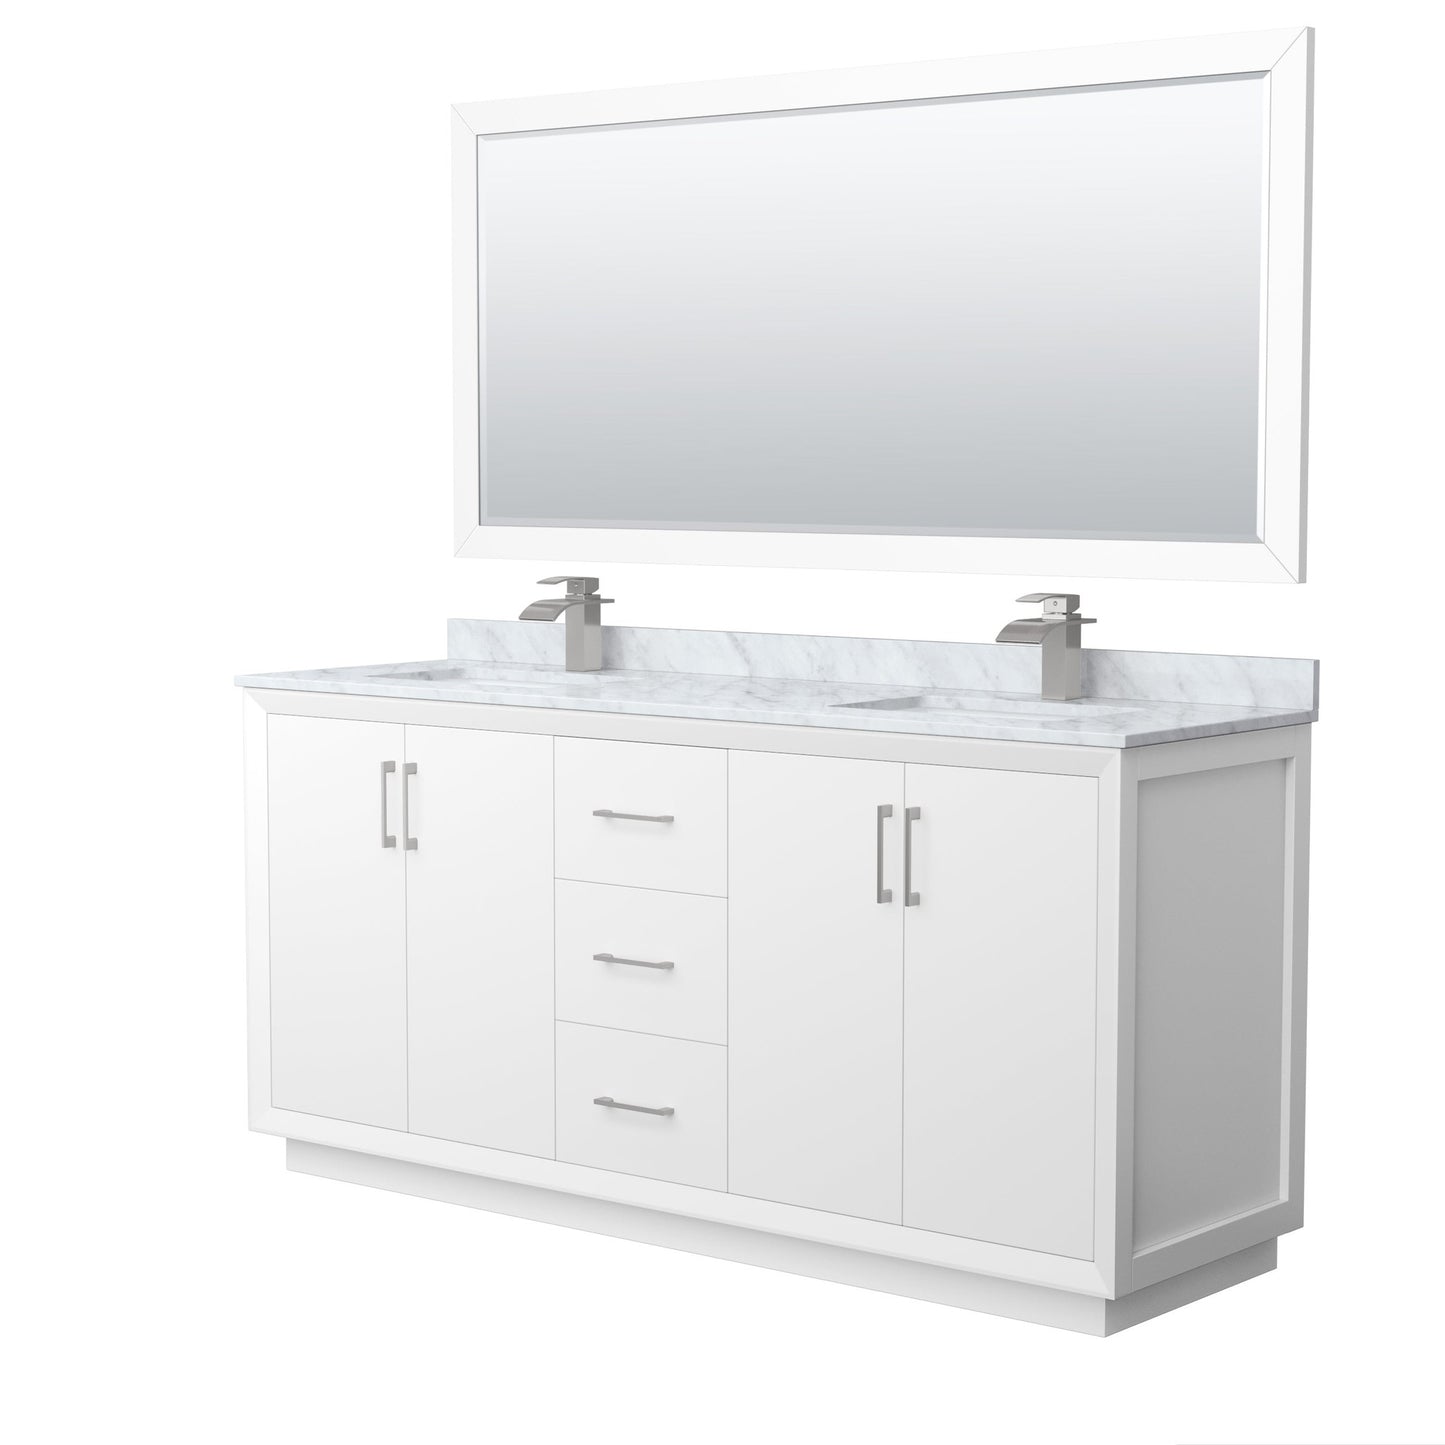 Wyndham Collection Strada 72" Double Bathroom Vanity in White, White Carrara Marble Countertop, Undermount Square Sink, Brushed Nickel Trim, 70" Mirror